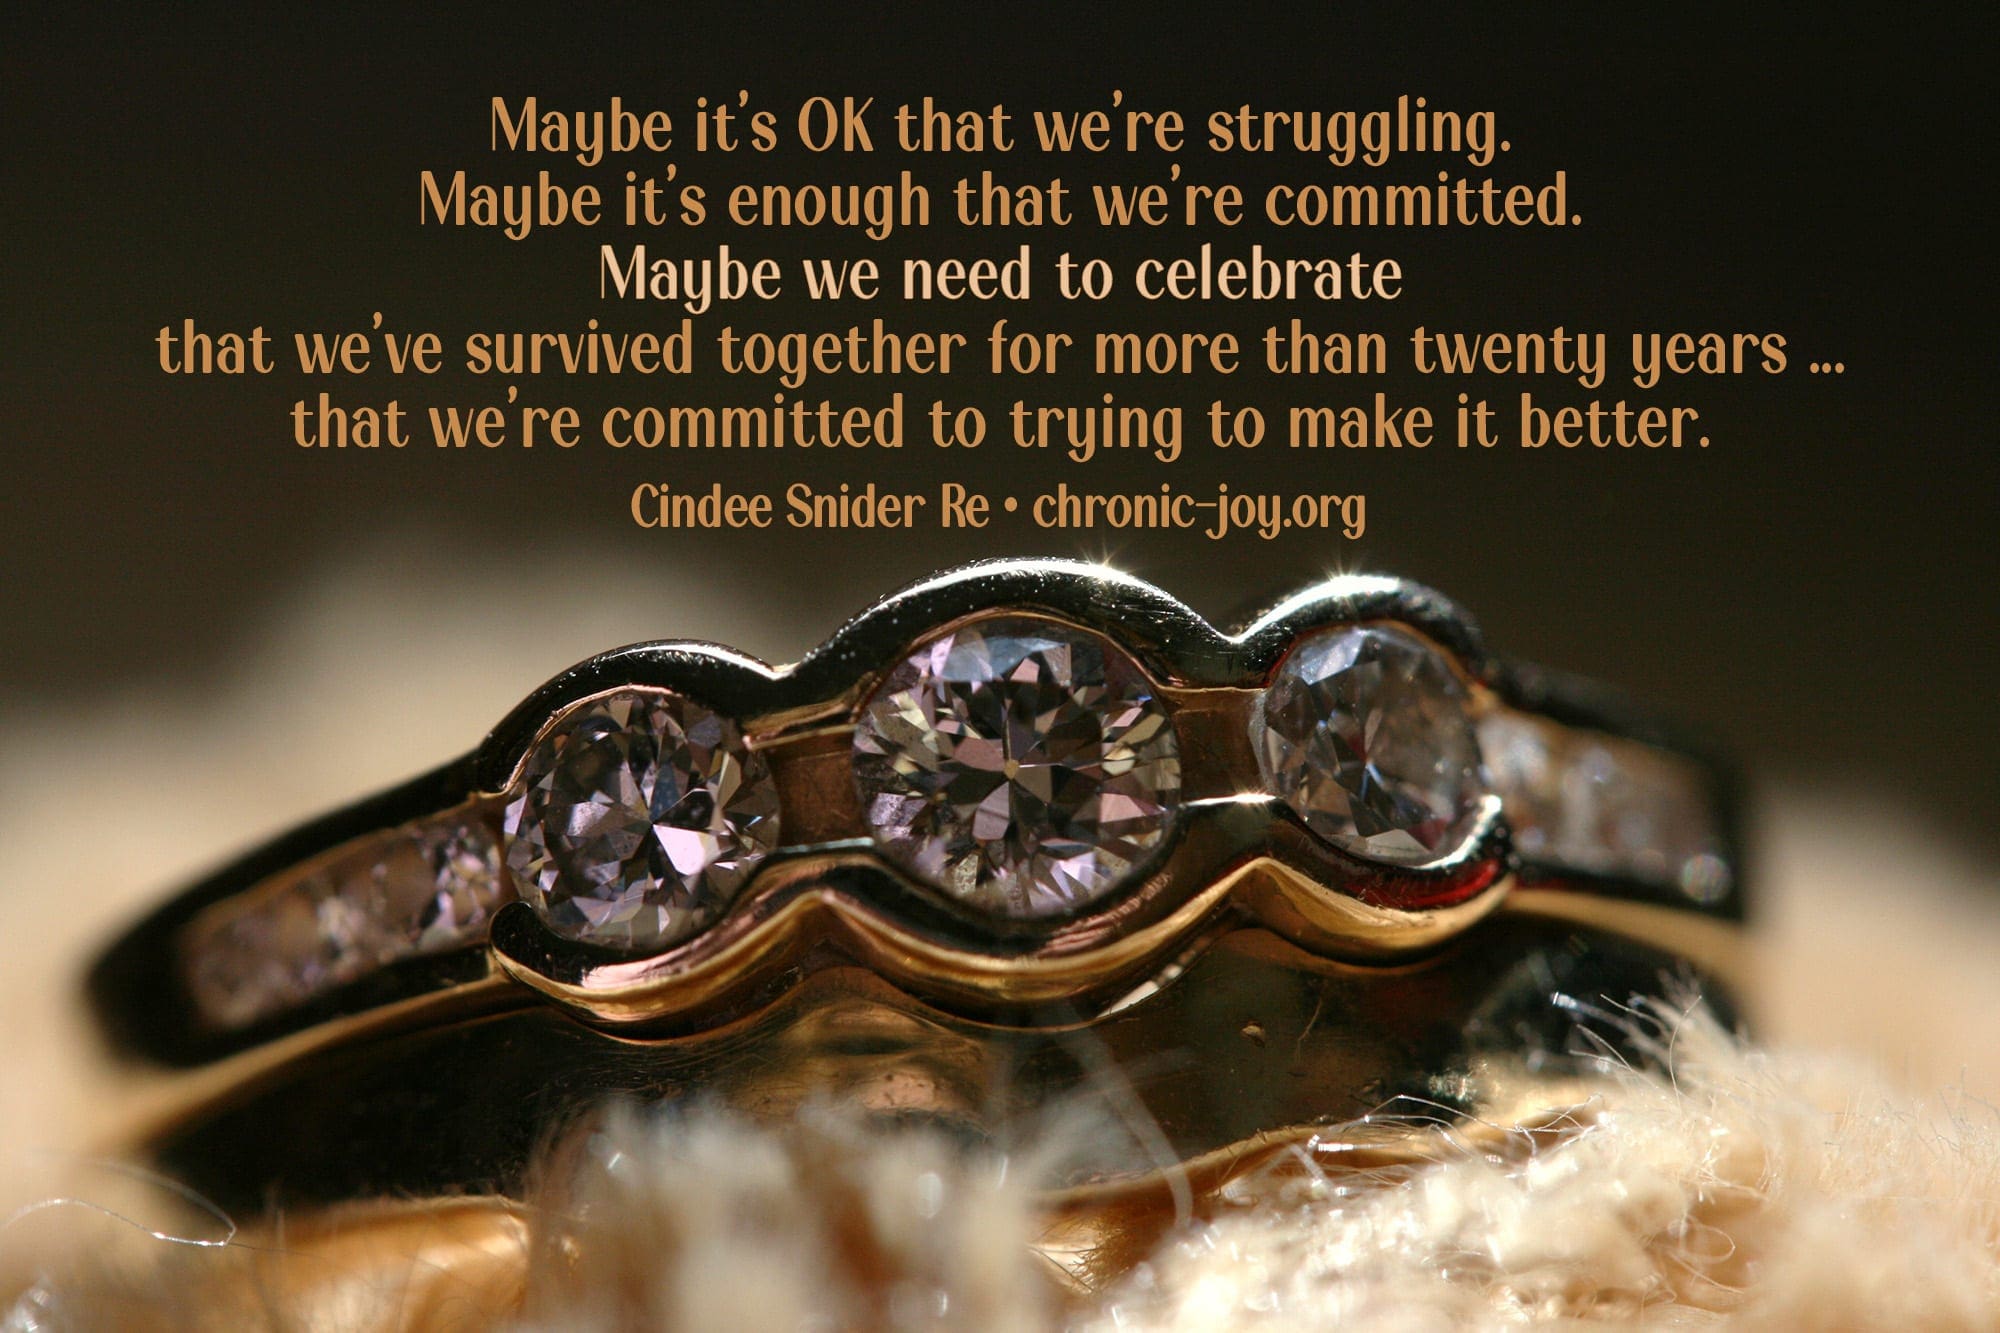 "Maybe it's OK that we're struggling. Maybe it's enough that we're committed. Maybe we need to celebrate that we've survived together for more than twenty years ... that we're committed to trying to make it better. " Cindee Snider Re